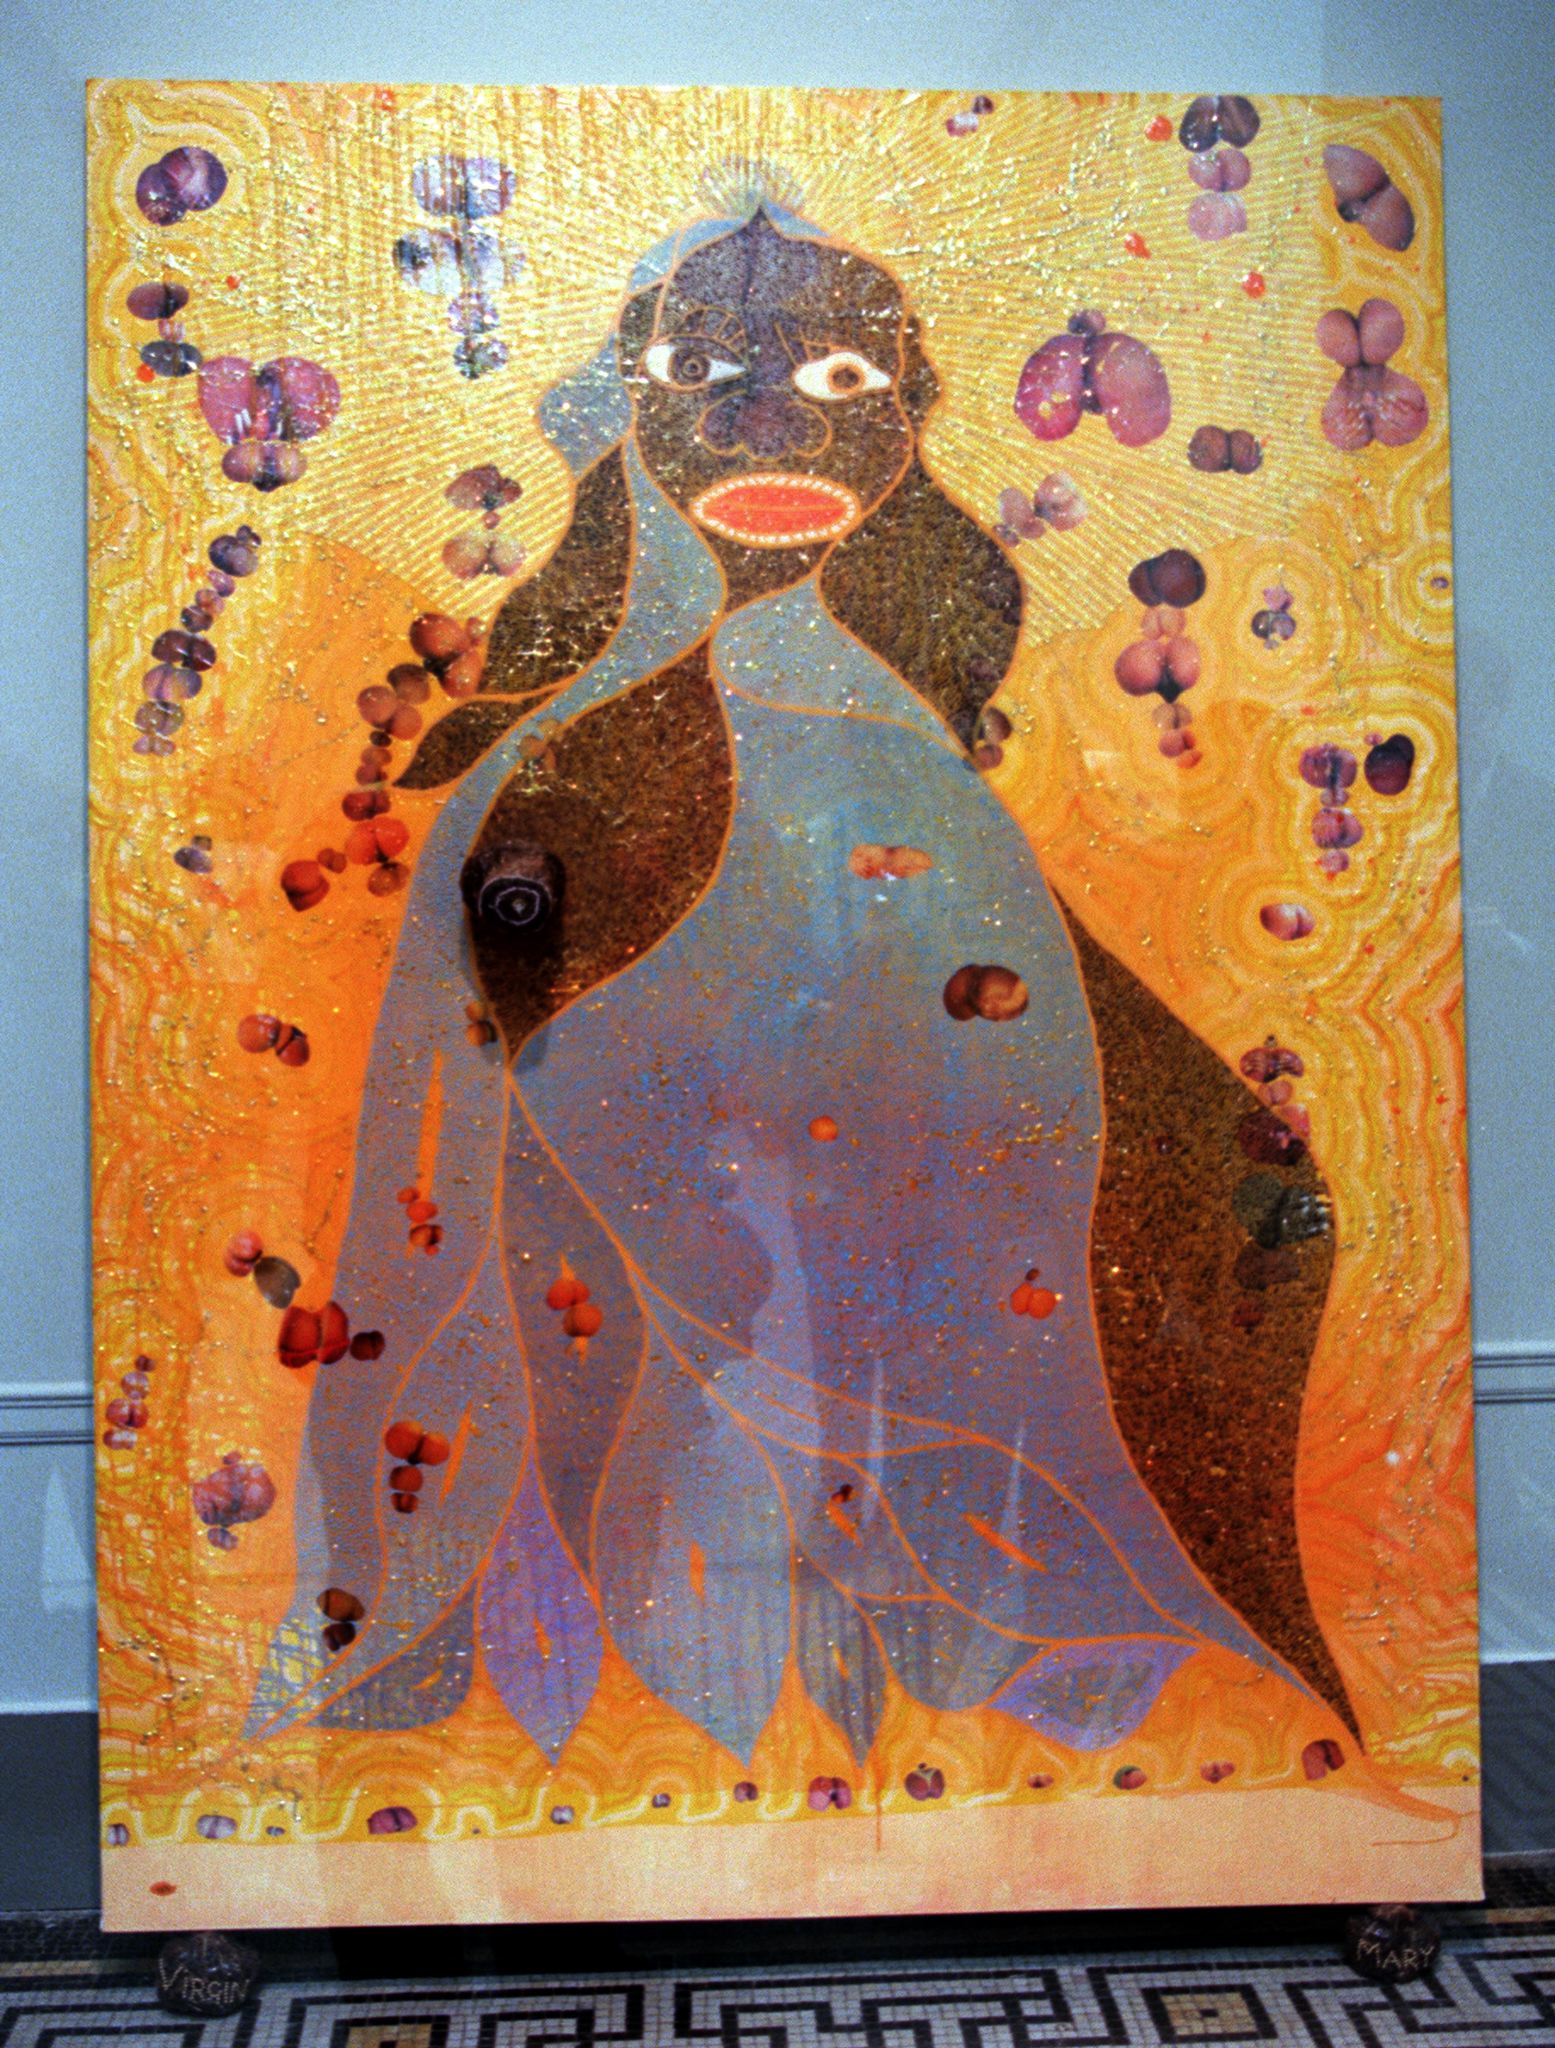 Artist Chris Ofili's controversial work The Holy V